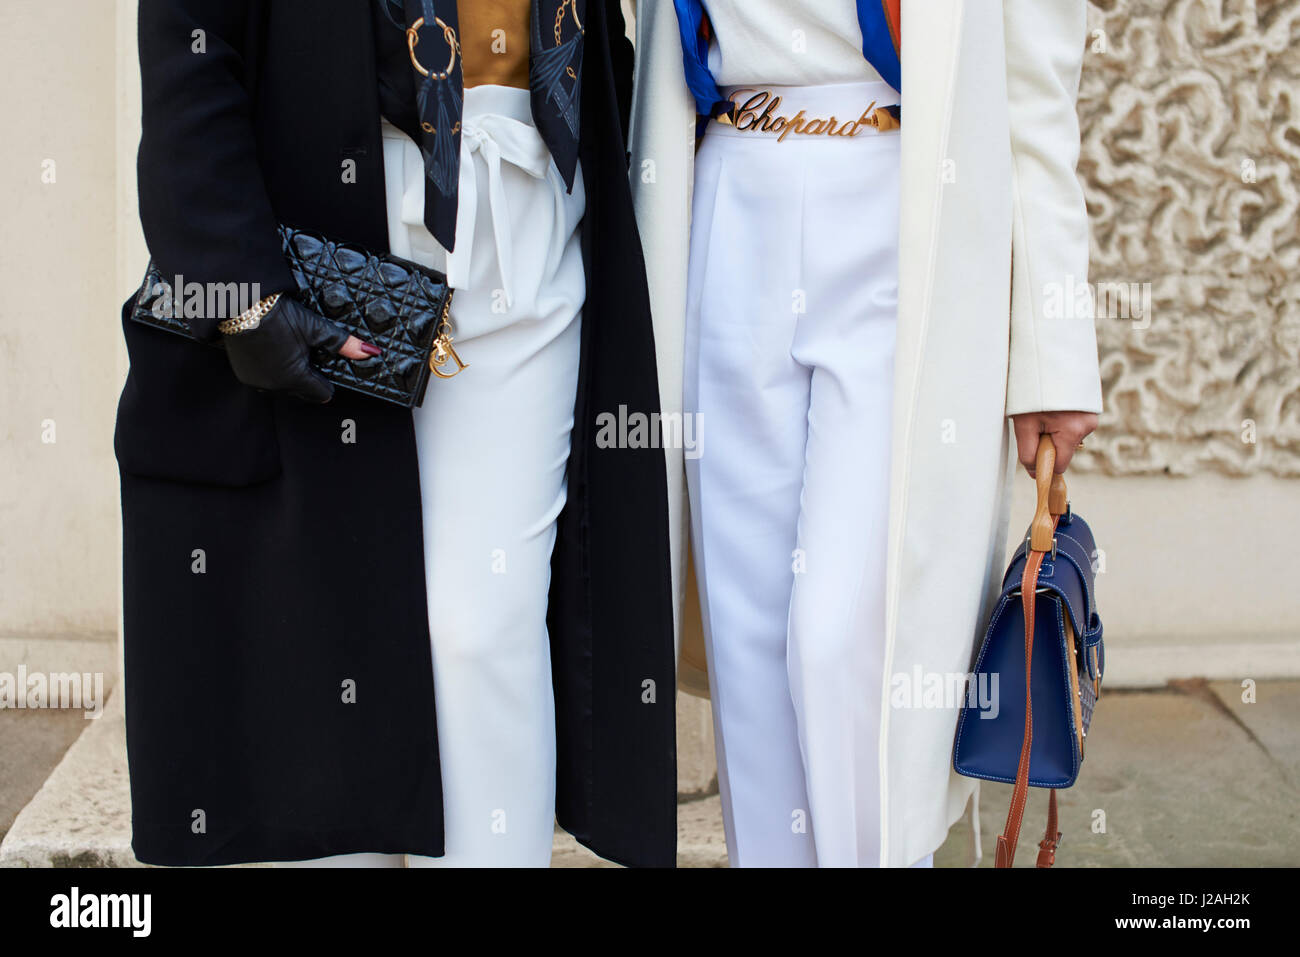 LONDON - FEBRUARY, 2017: Lower mid section of two women in the street holding handbags, a Chanel clutch bag on the left, while woman on the right wears a Chopard belt, during London Fashion Week, horizontal, front view Stock Photo